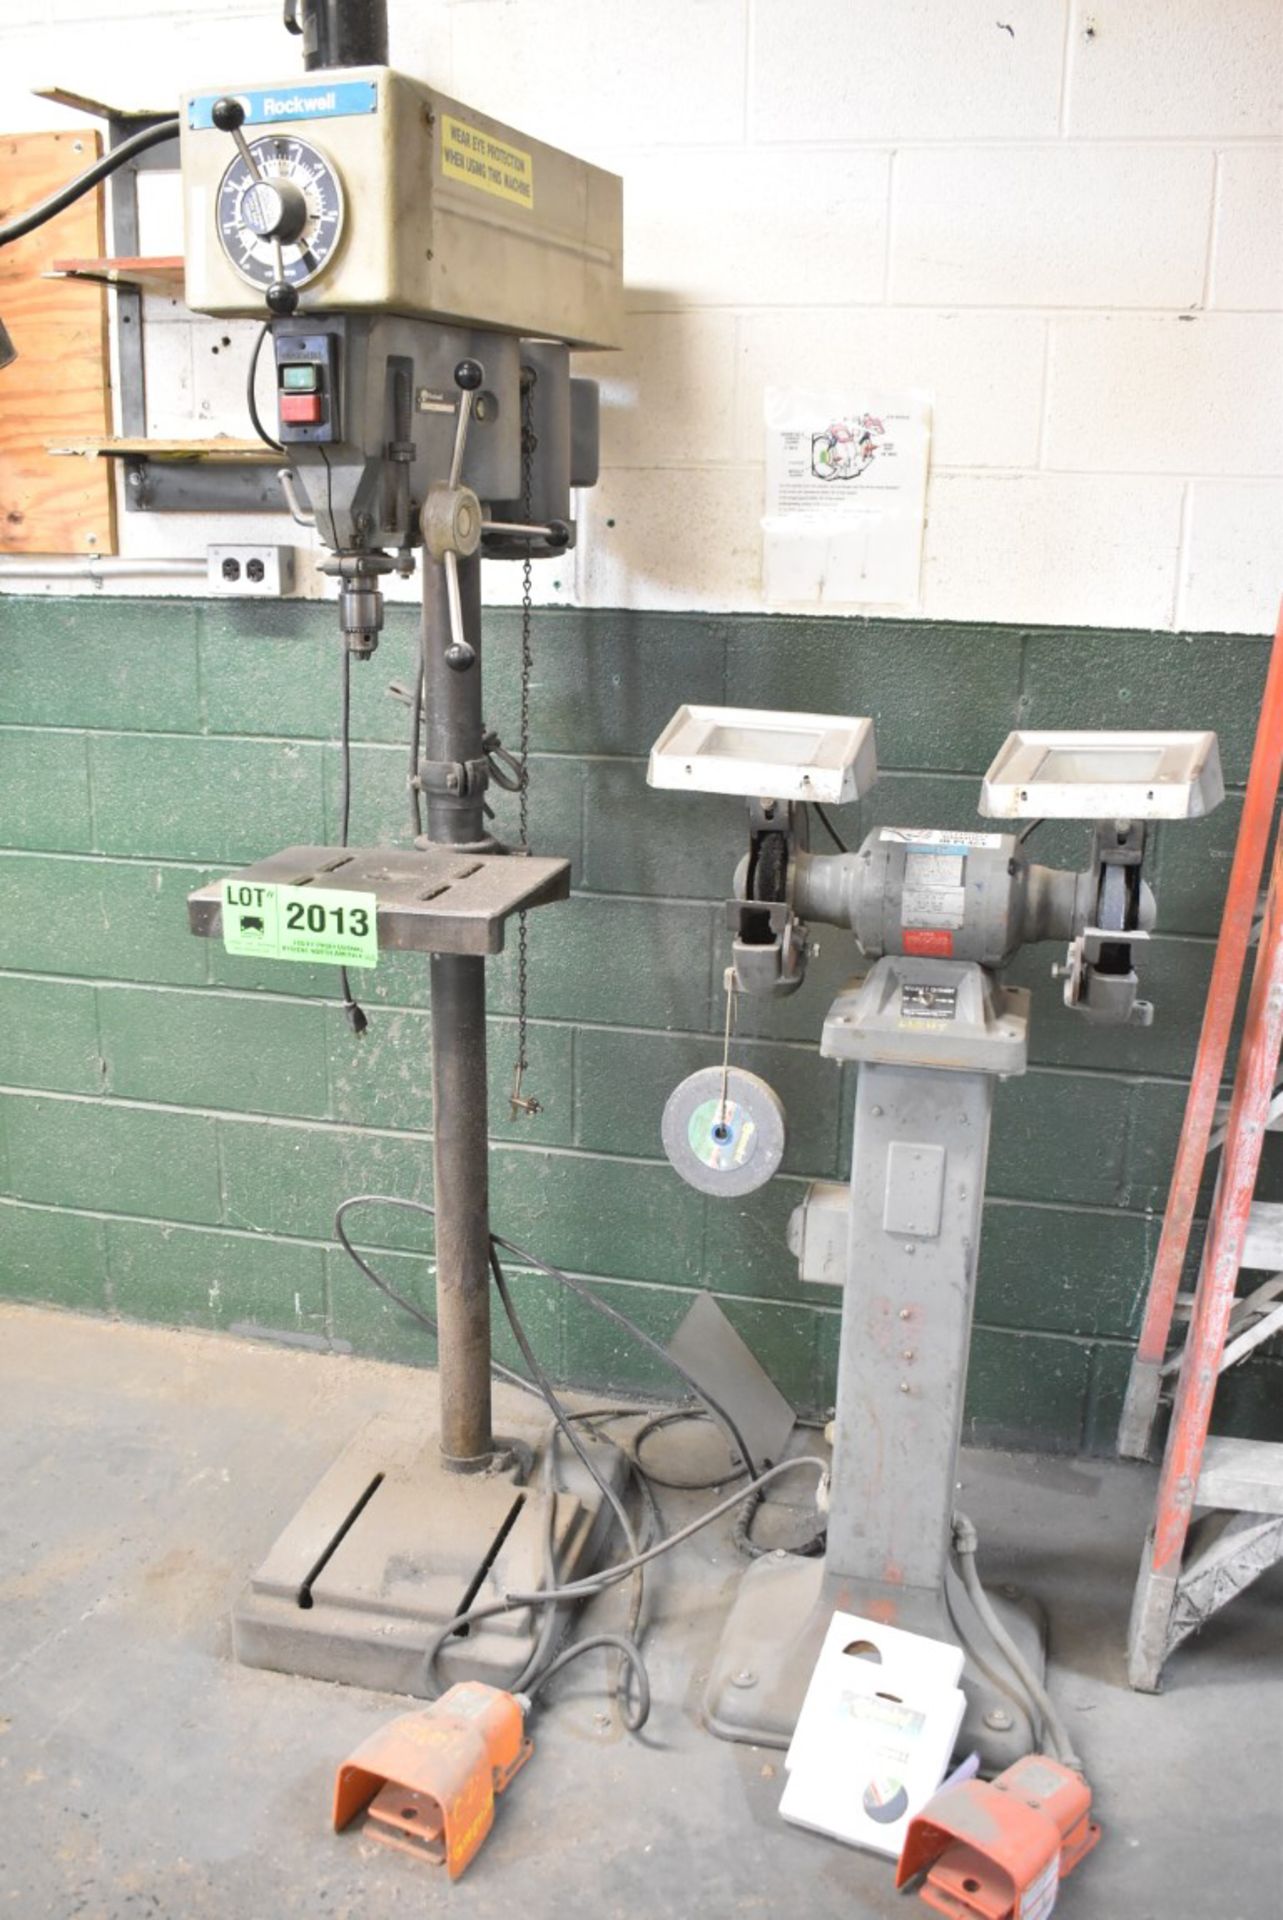 LOT/ ROCKWELL SERIES 15-655 HEAVY DUTY FLOOR TYPE DRILL PRESS WITH SPEEDS TO 3500 RPM, 1.5 HP